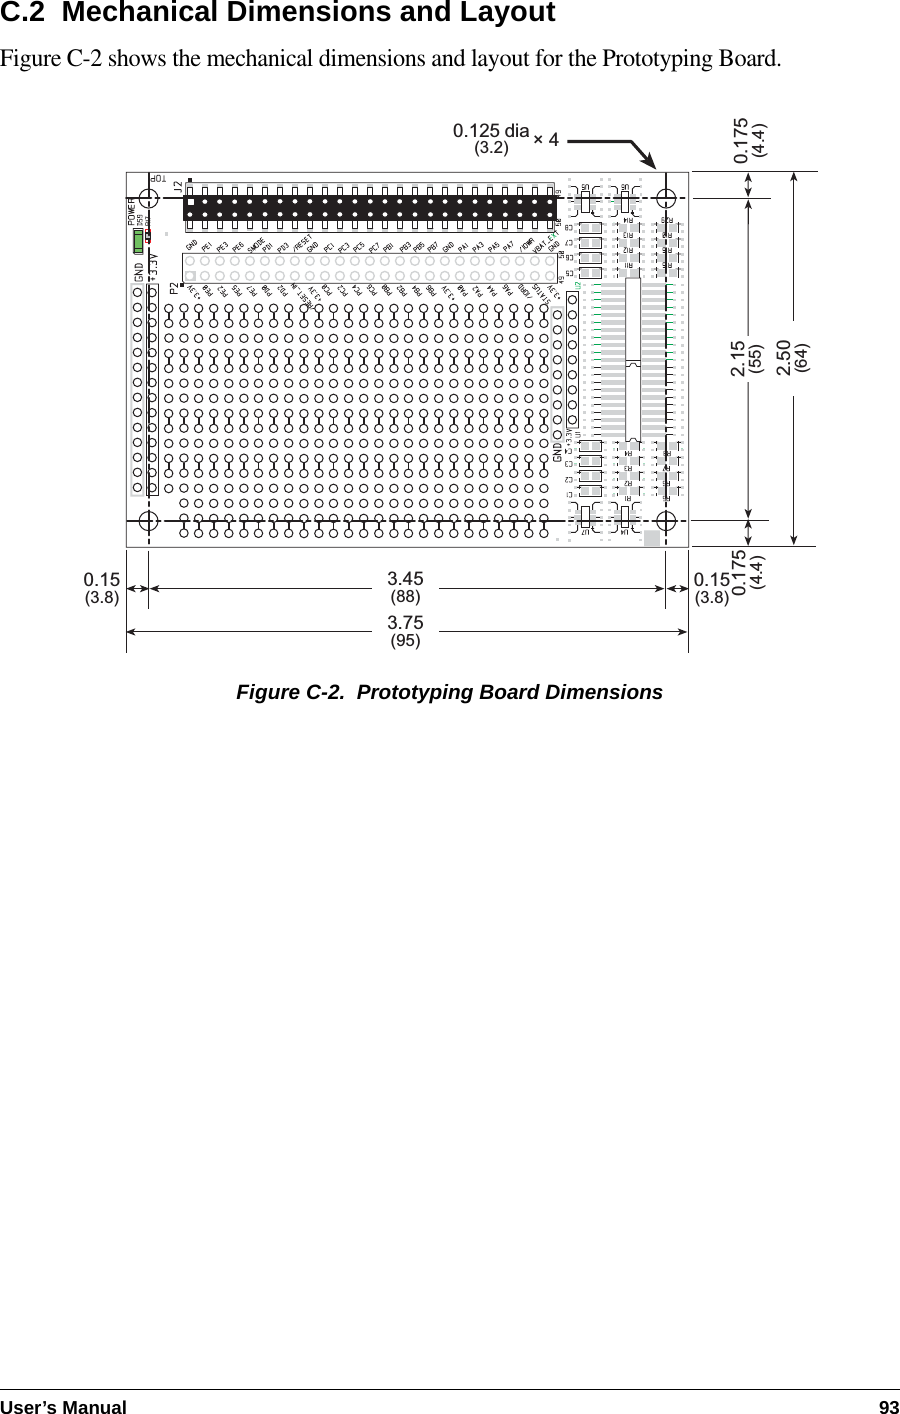 User’s Manual 93C.2  Mechanical Dimensions and LayoutFigure C-2 shows the mechanical dimensions and layout for the Prototyping Board.Figure C-2.  Prototyping Board Dimensions0.15(3.8)0.15(3.8)0.175(4.4)3.45(88)3.75(95)2.50(64)0.175(4.4)× 40.125 dia(3.2)2.15(55)